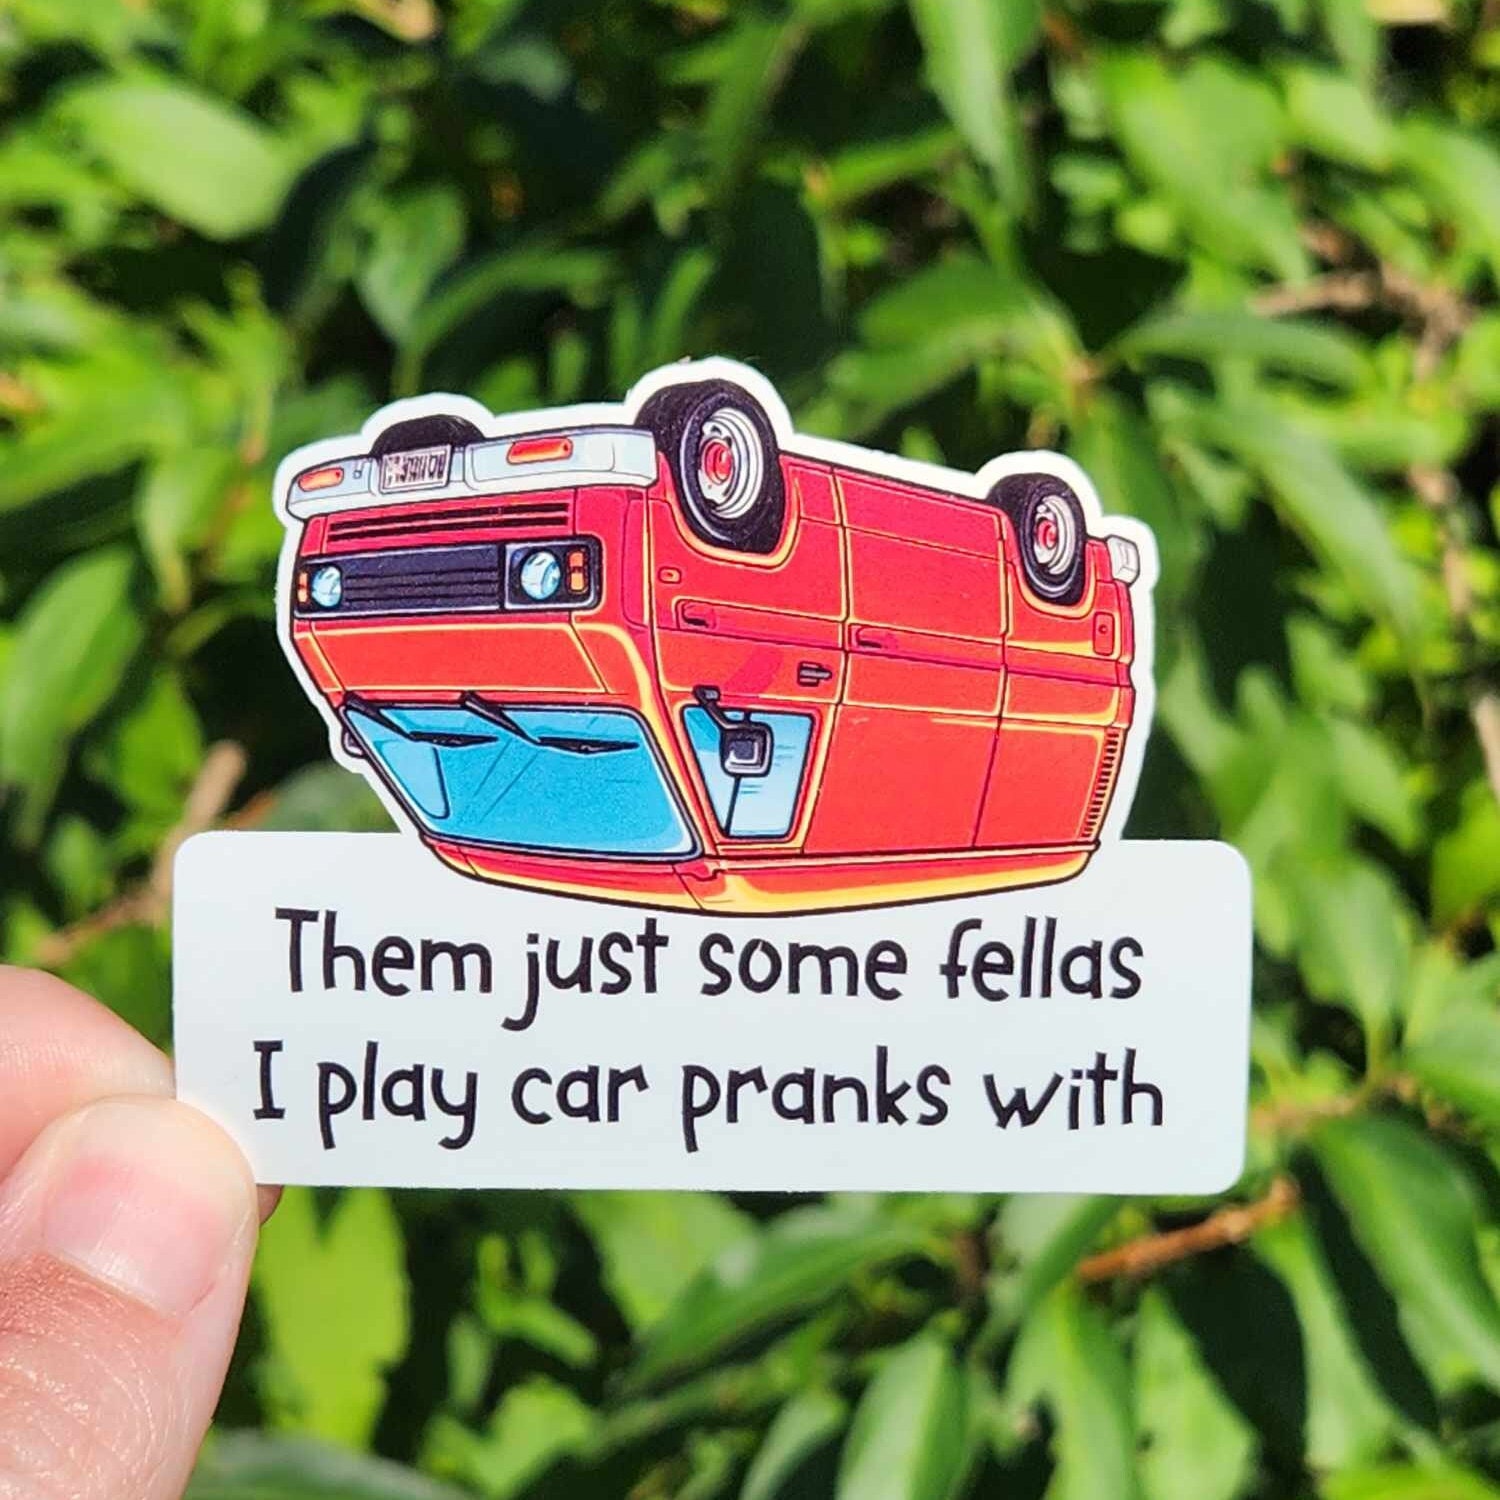 Let's play a prank with these prank stickers #pranks #prank #funny 